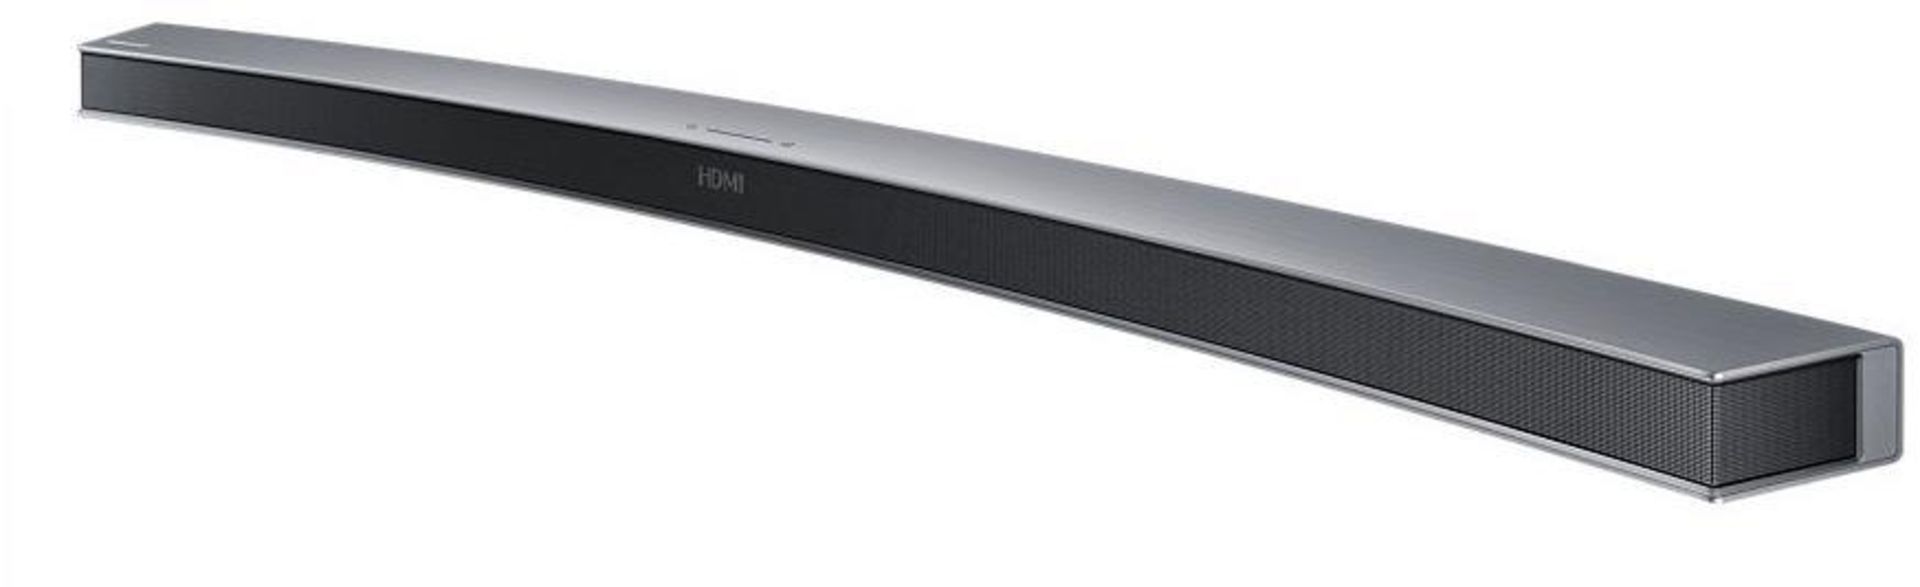 V Brand New Samsung 6.1Ch Wireless 300W Silver Curved Soundbar And Subwoofer With Bluetooth USB - Image 3 of 3